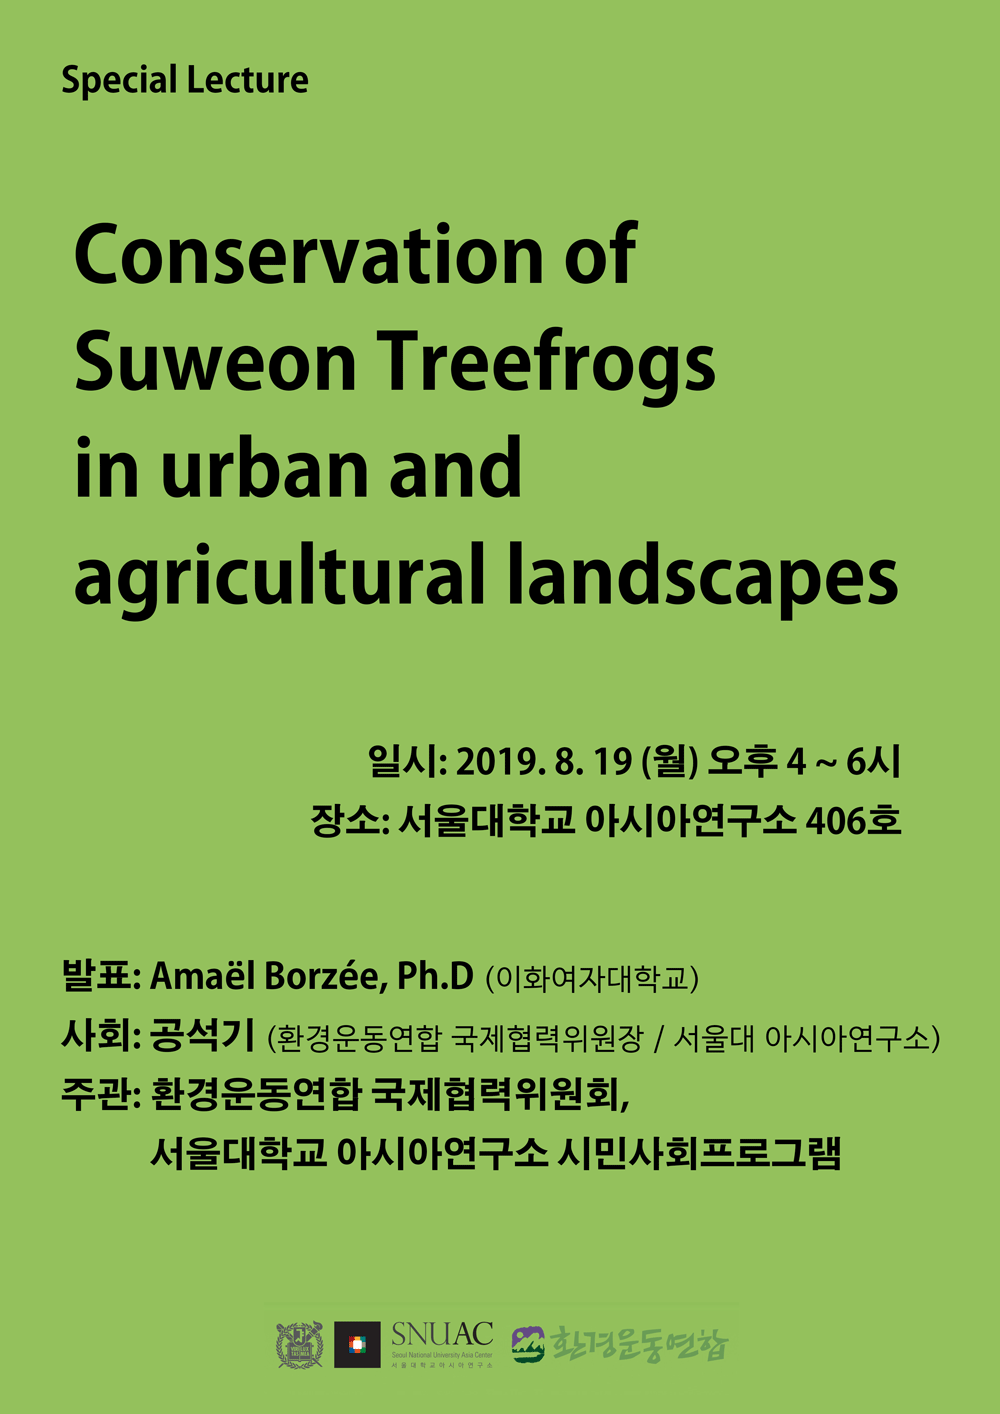 Conservation of Suweon Treefrogs in urban and agricultural landscapes